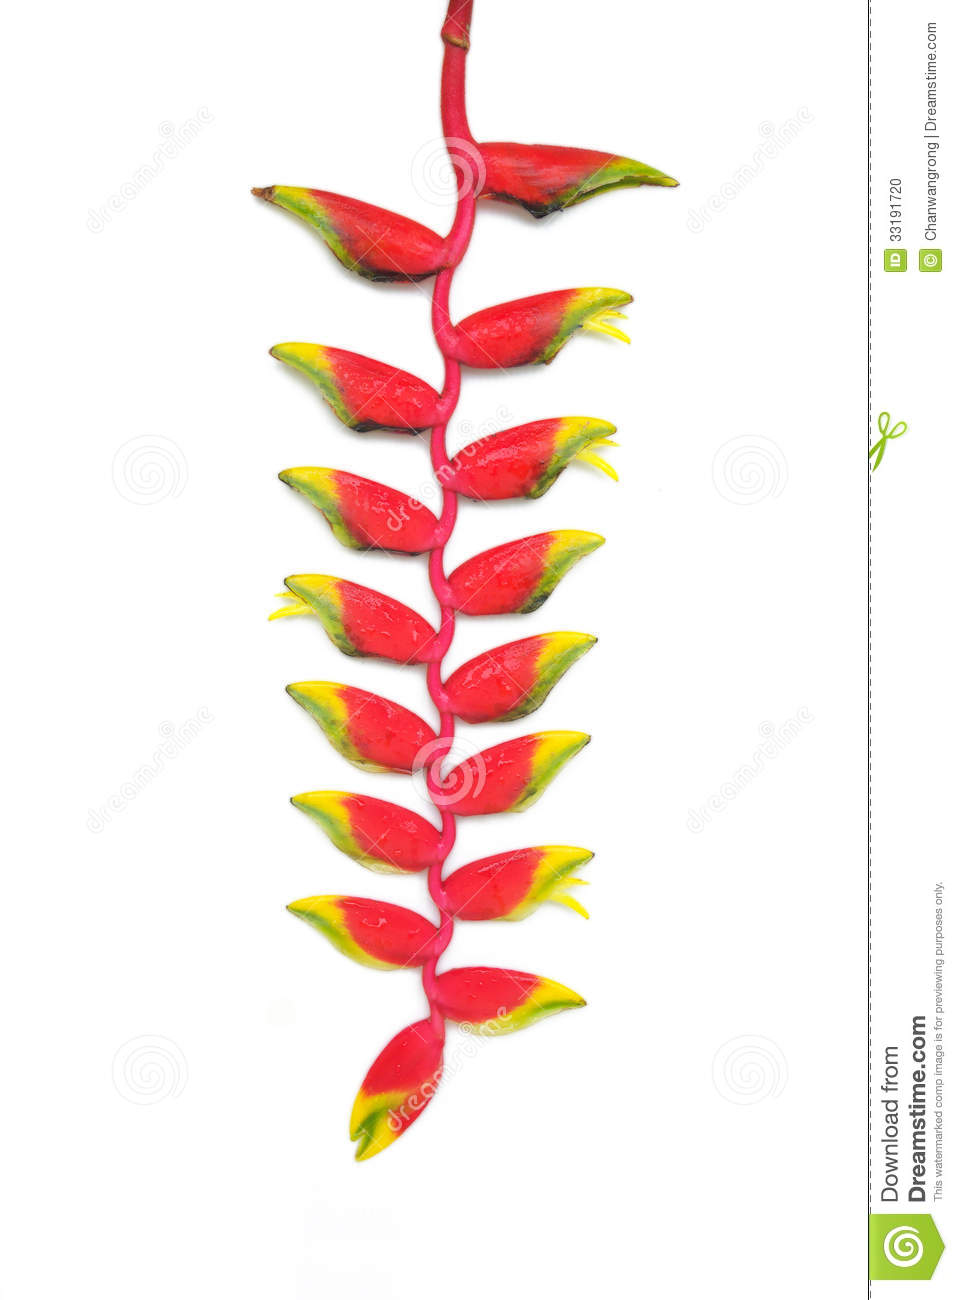 Heliconia clipart #7, Download drawings